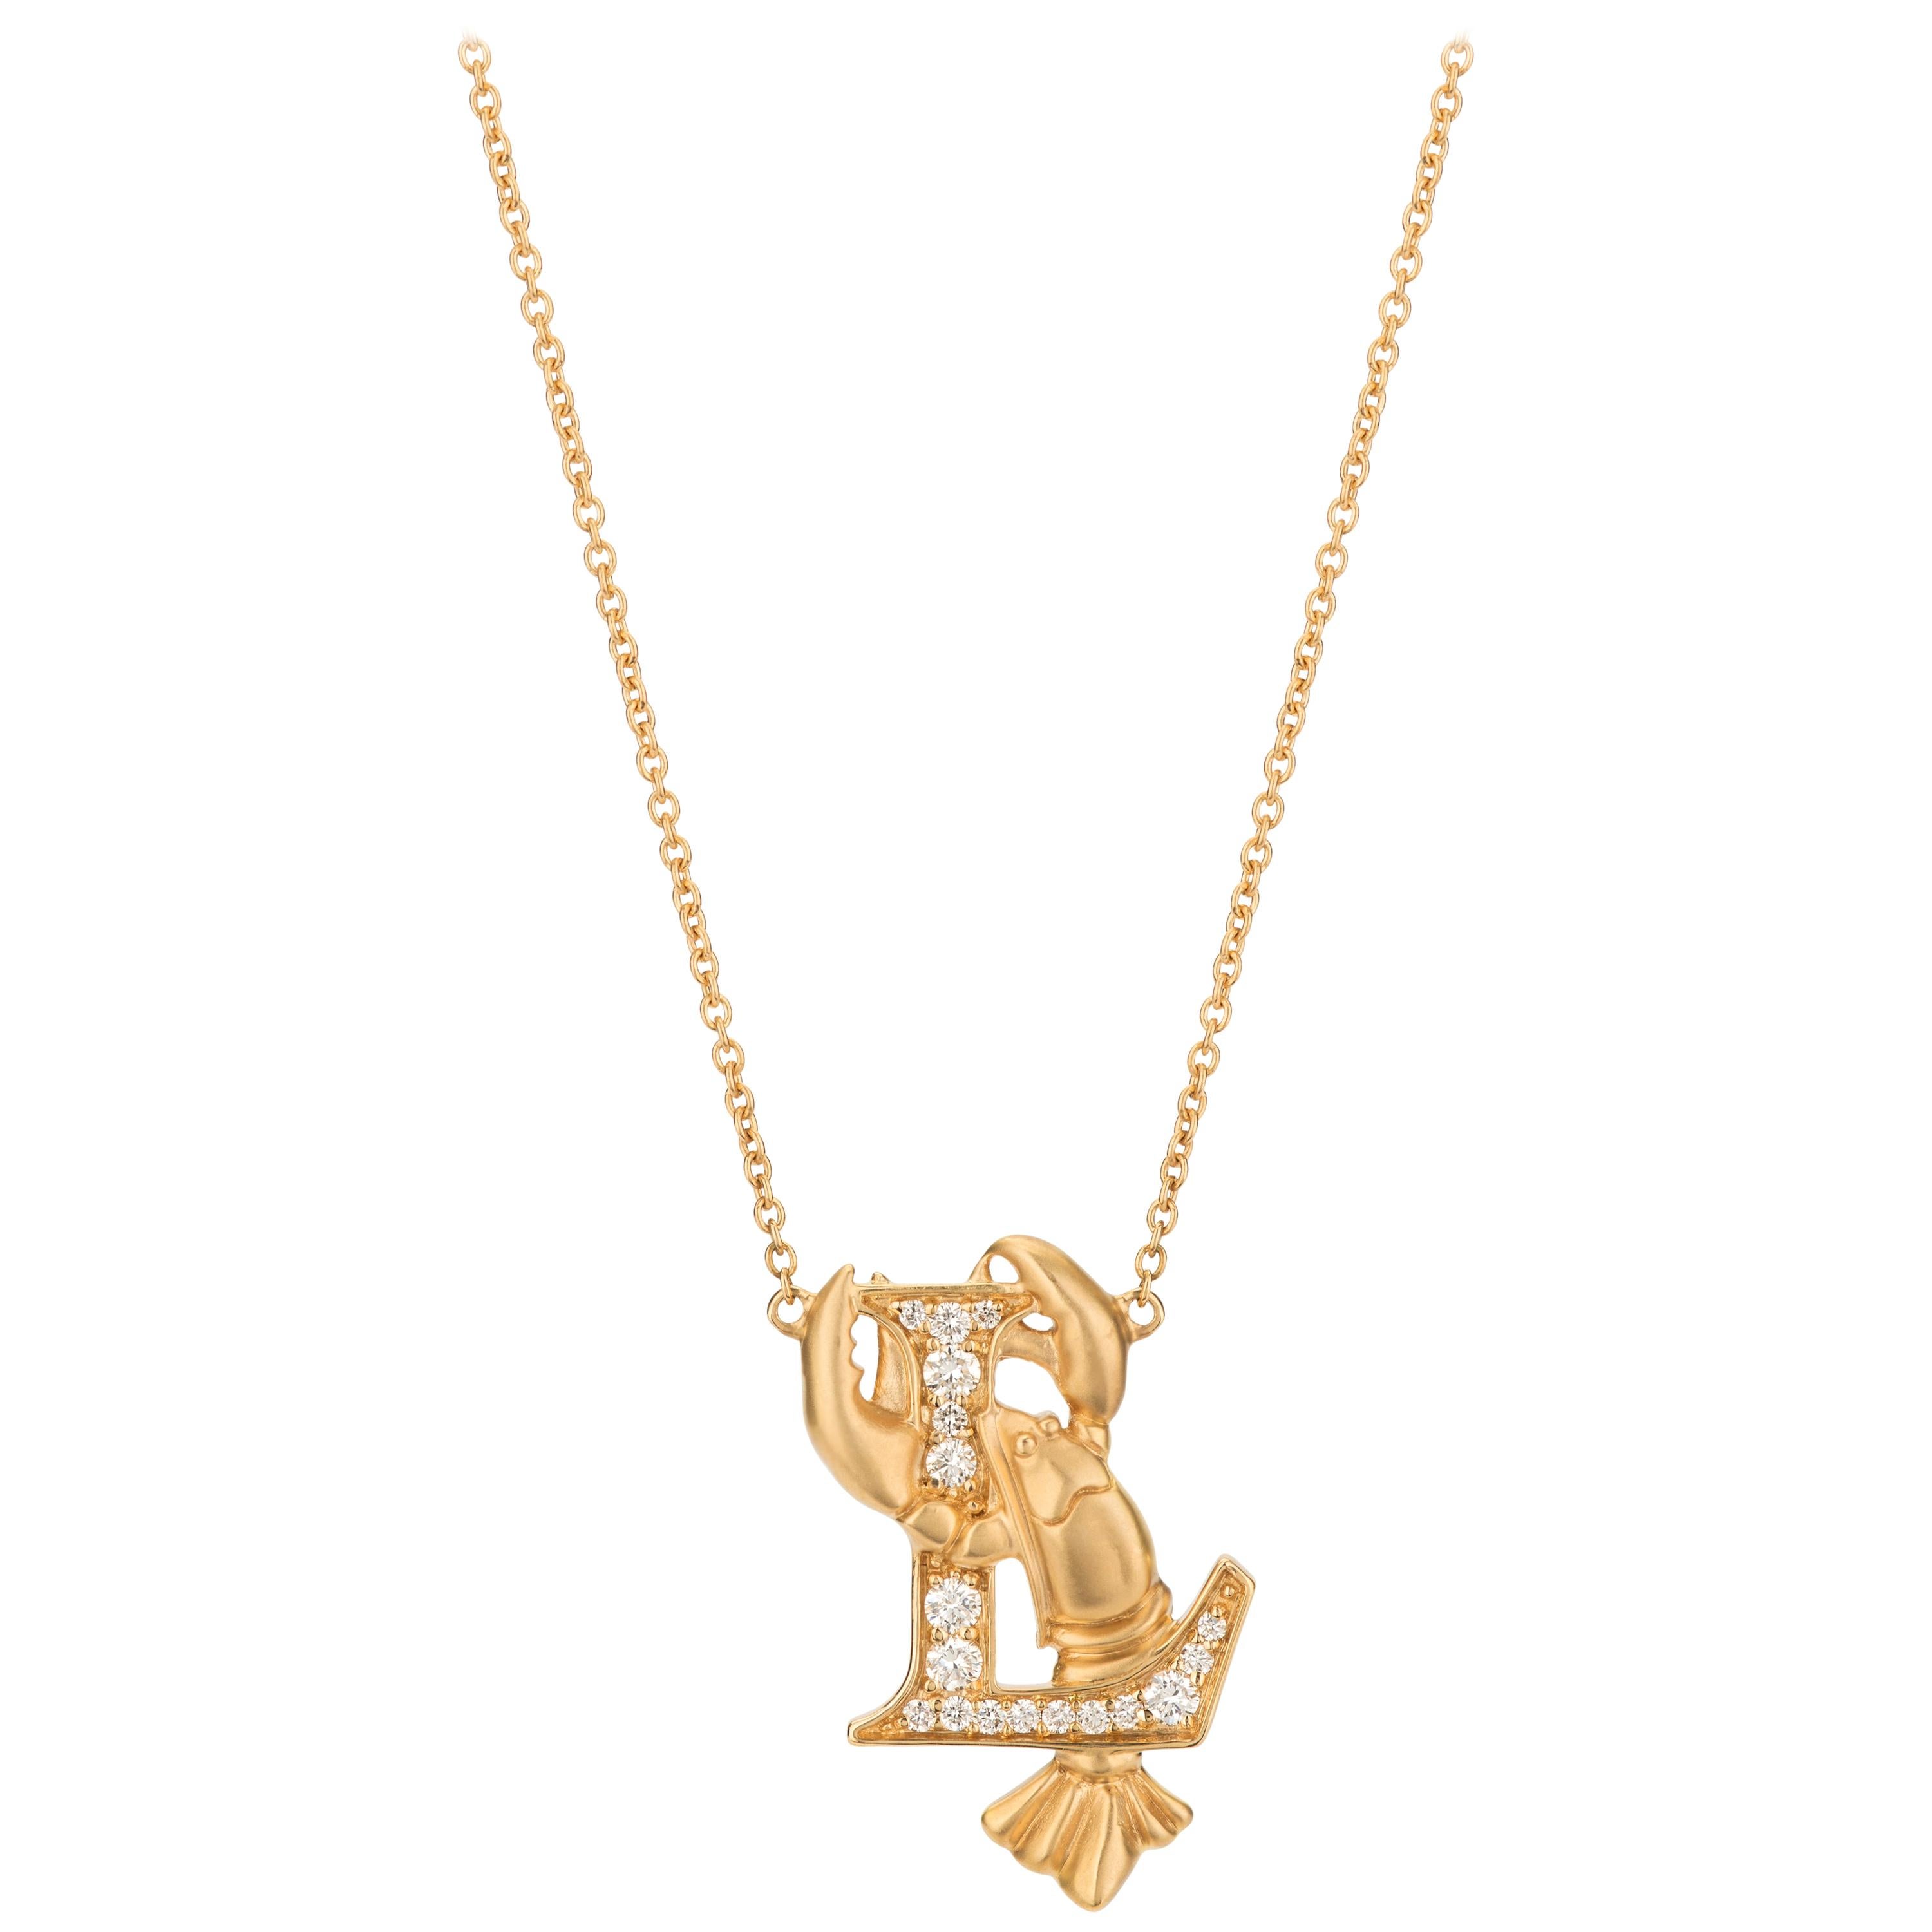 Stephen Webster Fish Tales L is for Lobster 18K Gold and White Diamond Necklace